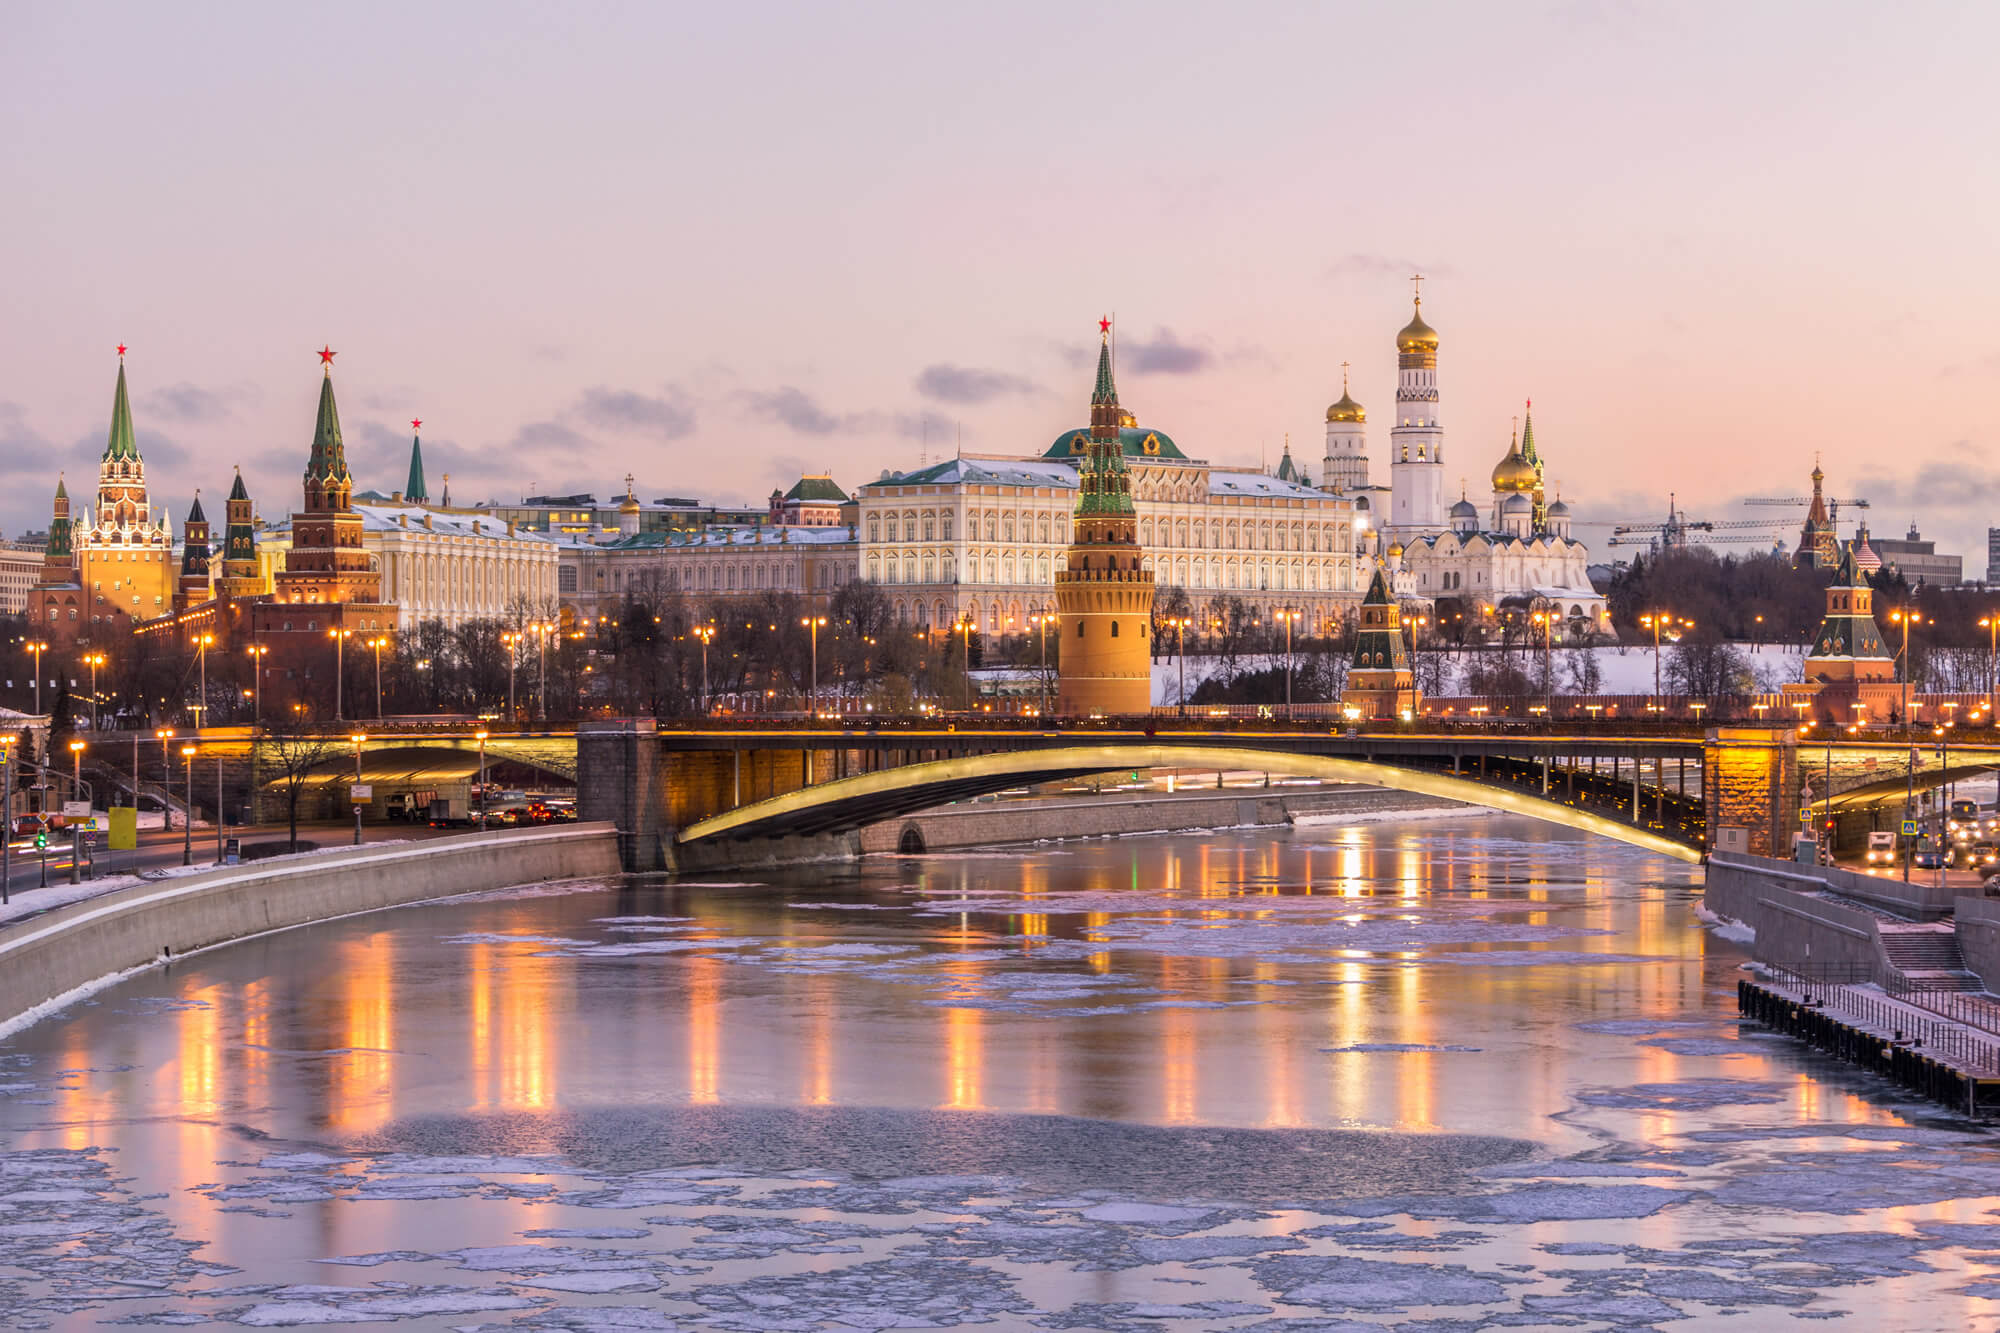 Moscow Kremlin and Moscow River, Russia